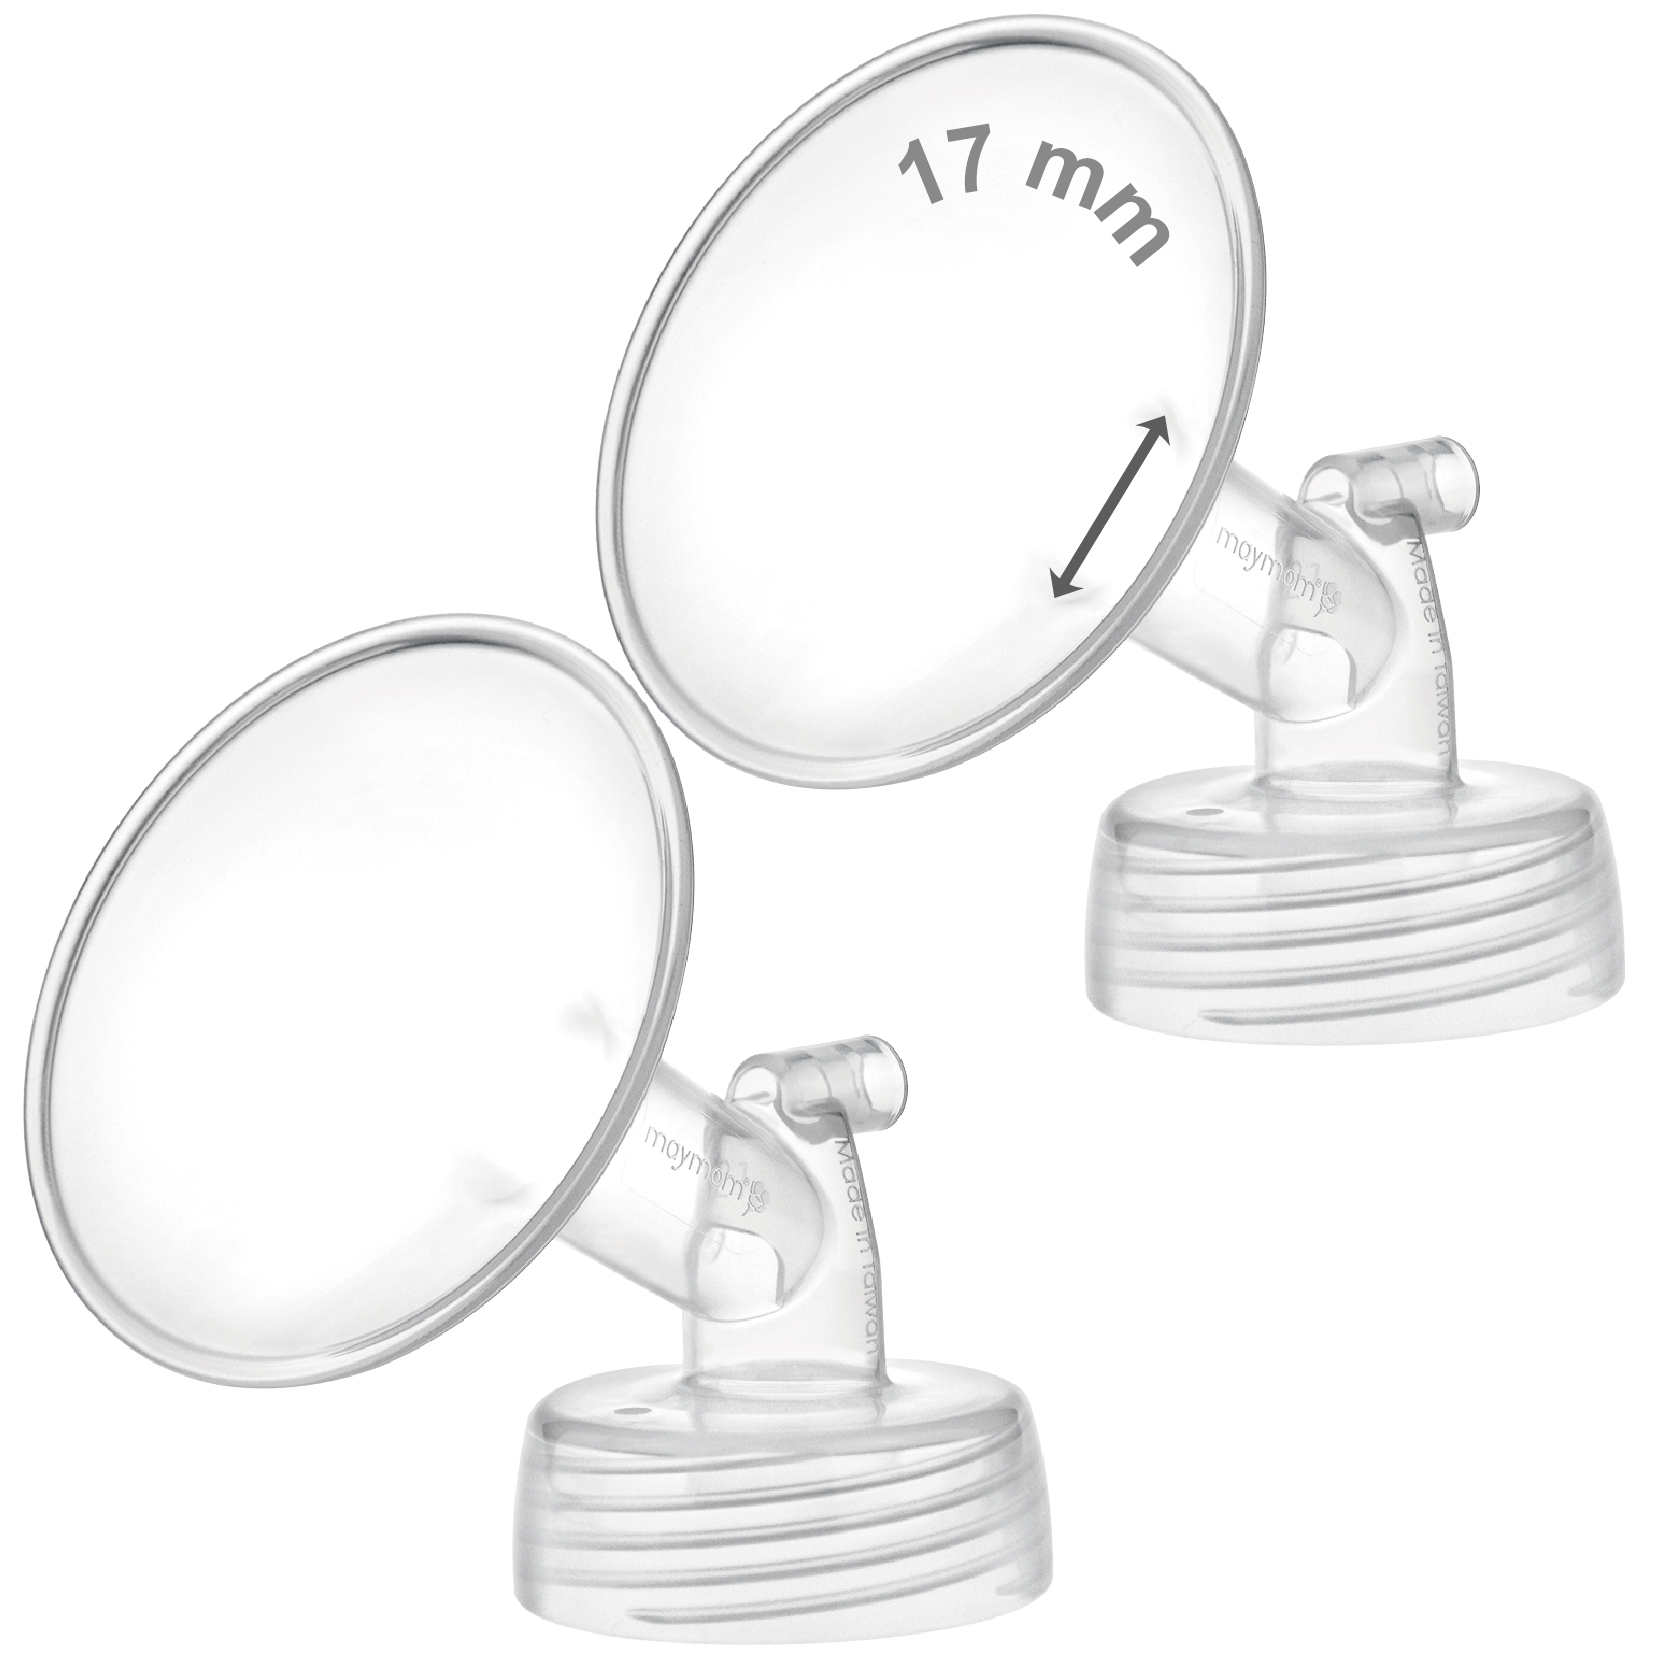 Maymom widemouth one-piece flange for spectra, 17 mm; 2 flange